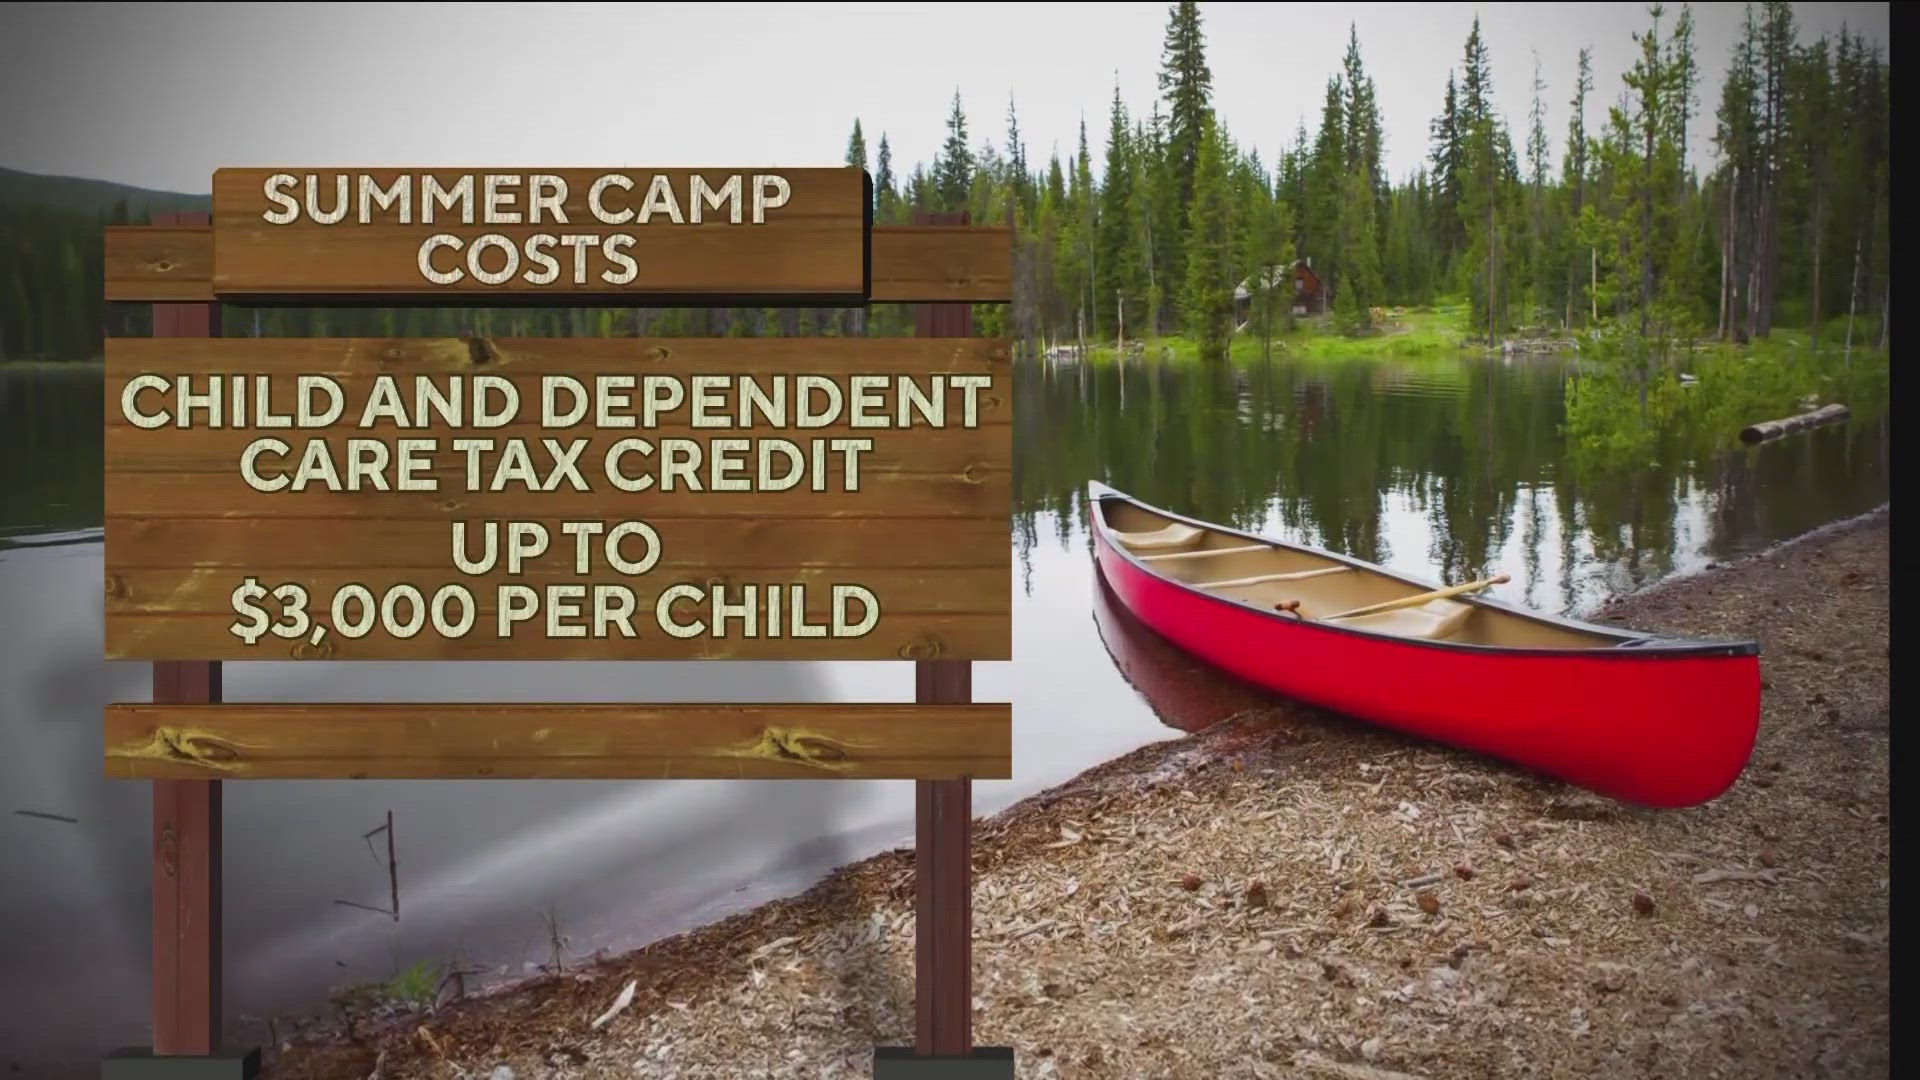 Parents are reacting to the soaring costs of summer camp for kids in the U.S. Here's why it's getting competitive.